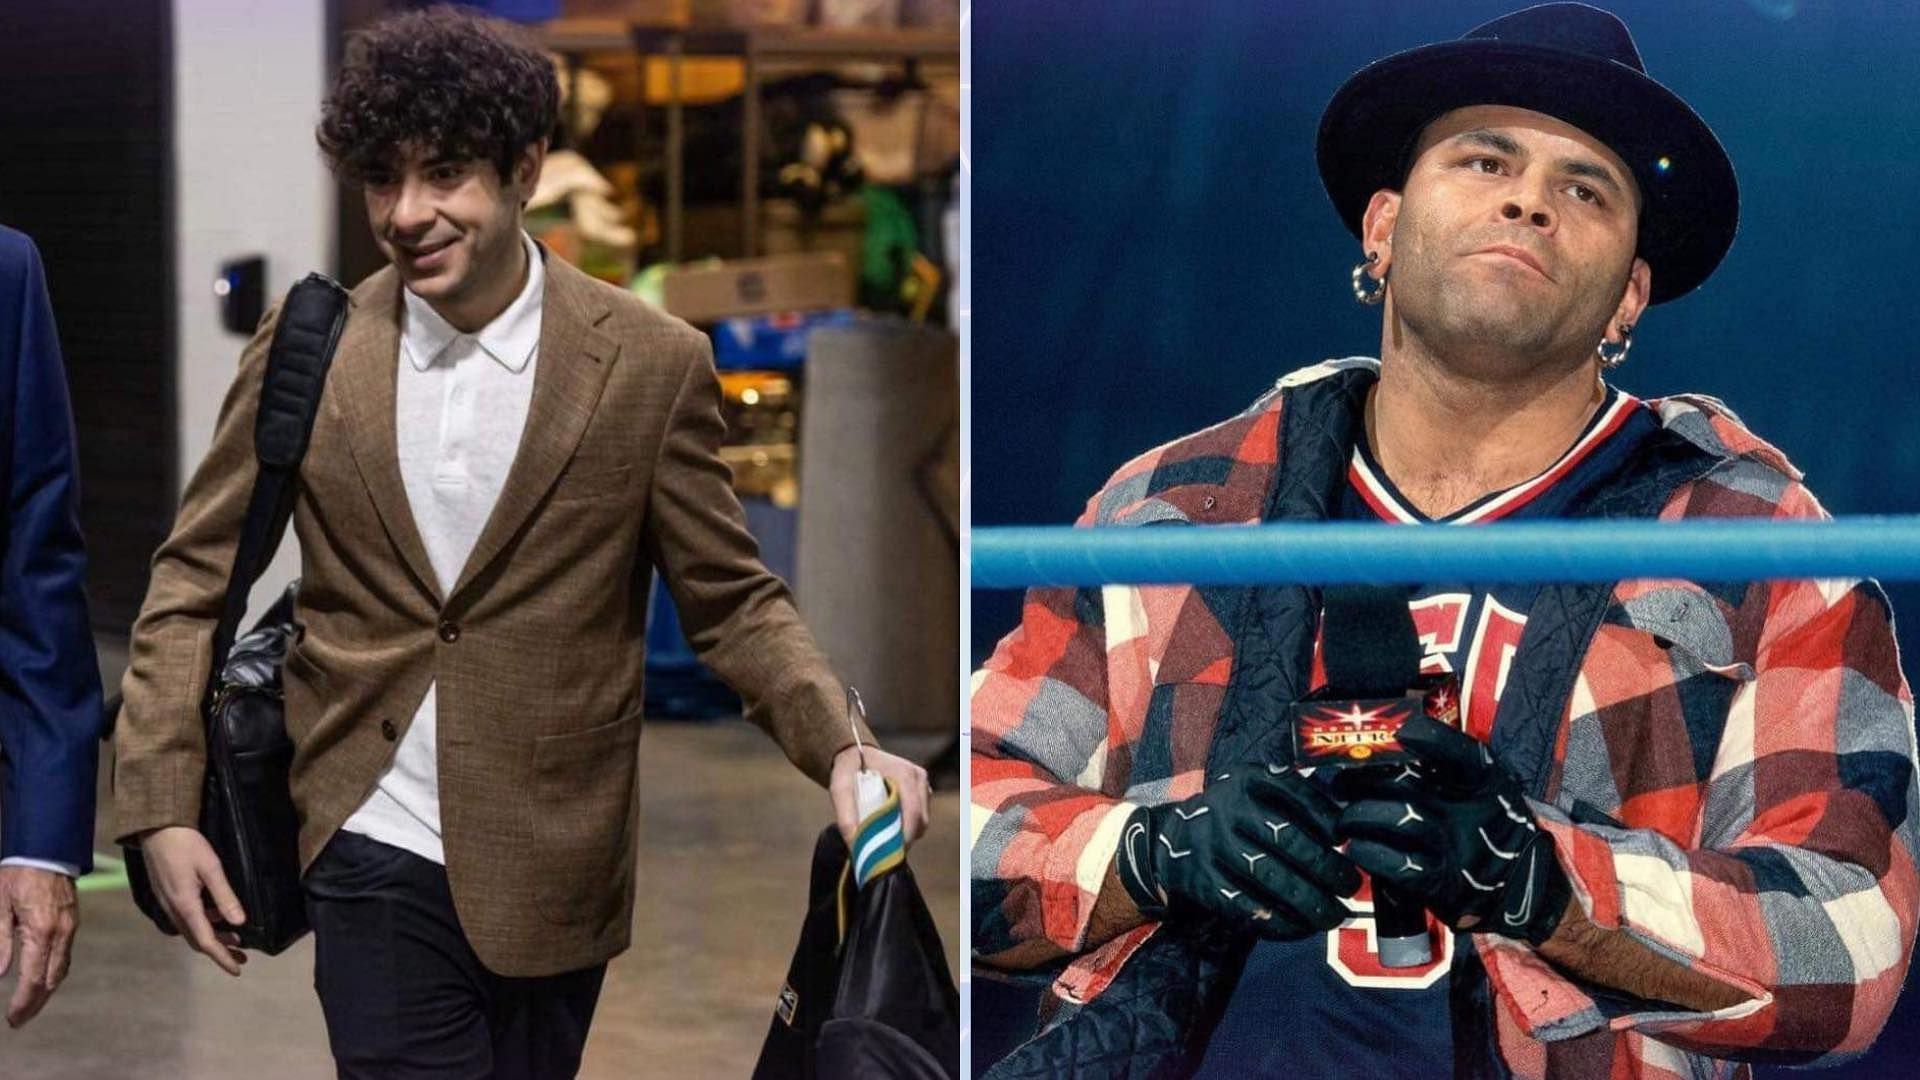 Tony Khan is the president of All Elite Wrestling and Konnan is a WCW veteran [Photo courtesy of Tony Khan